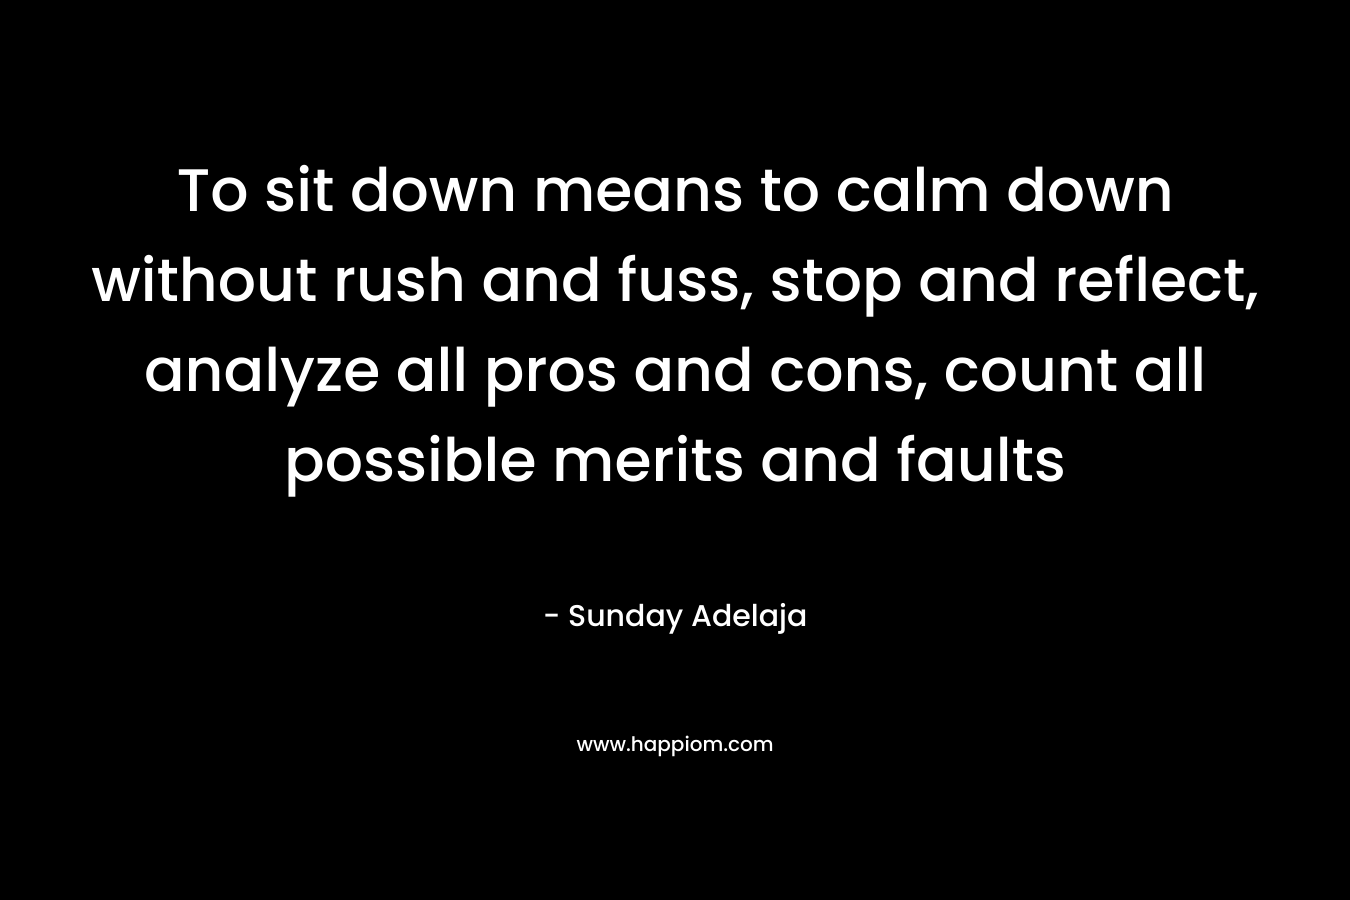 To sit down means to calm down without rush and fuss, stop and reflect, analyze all pros and cons, count all possible merits and faults – Sunday Adelaja